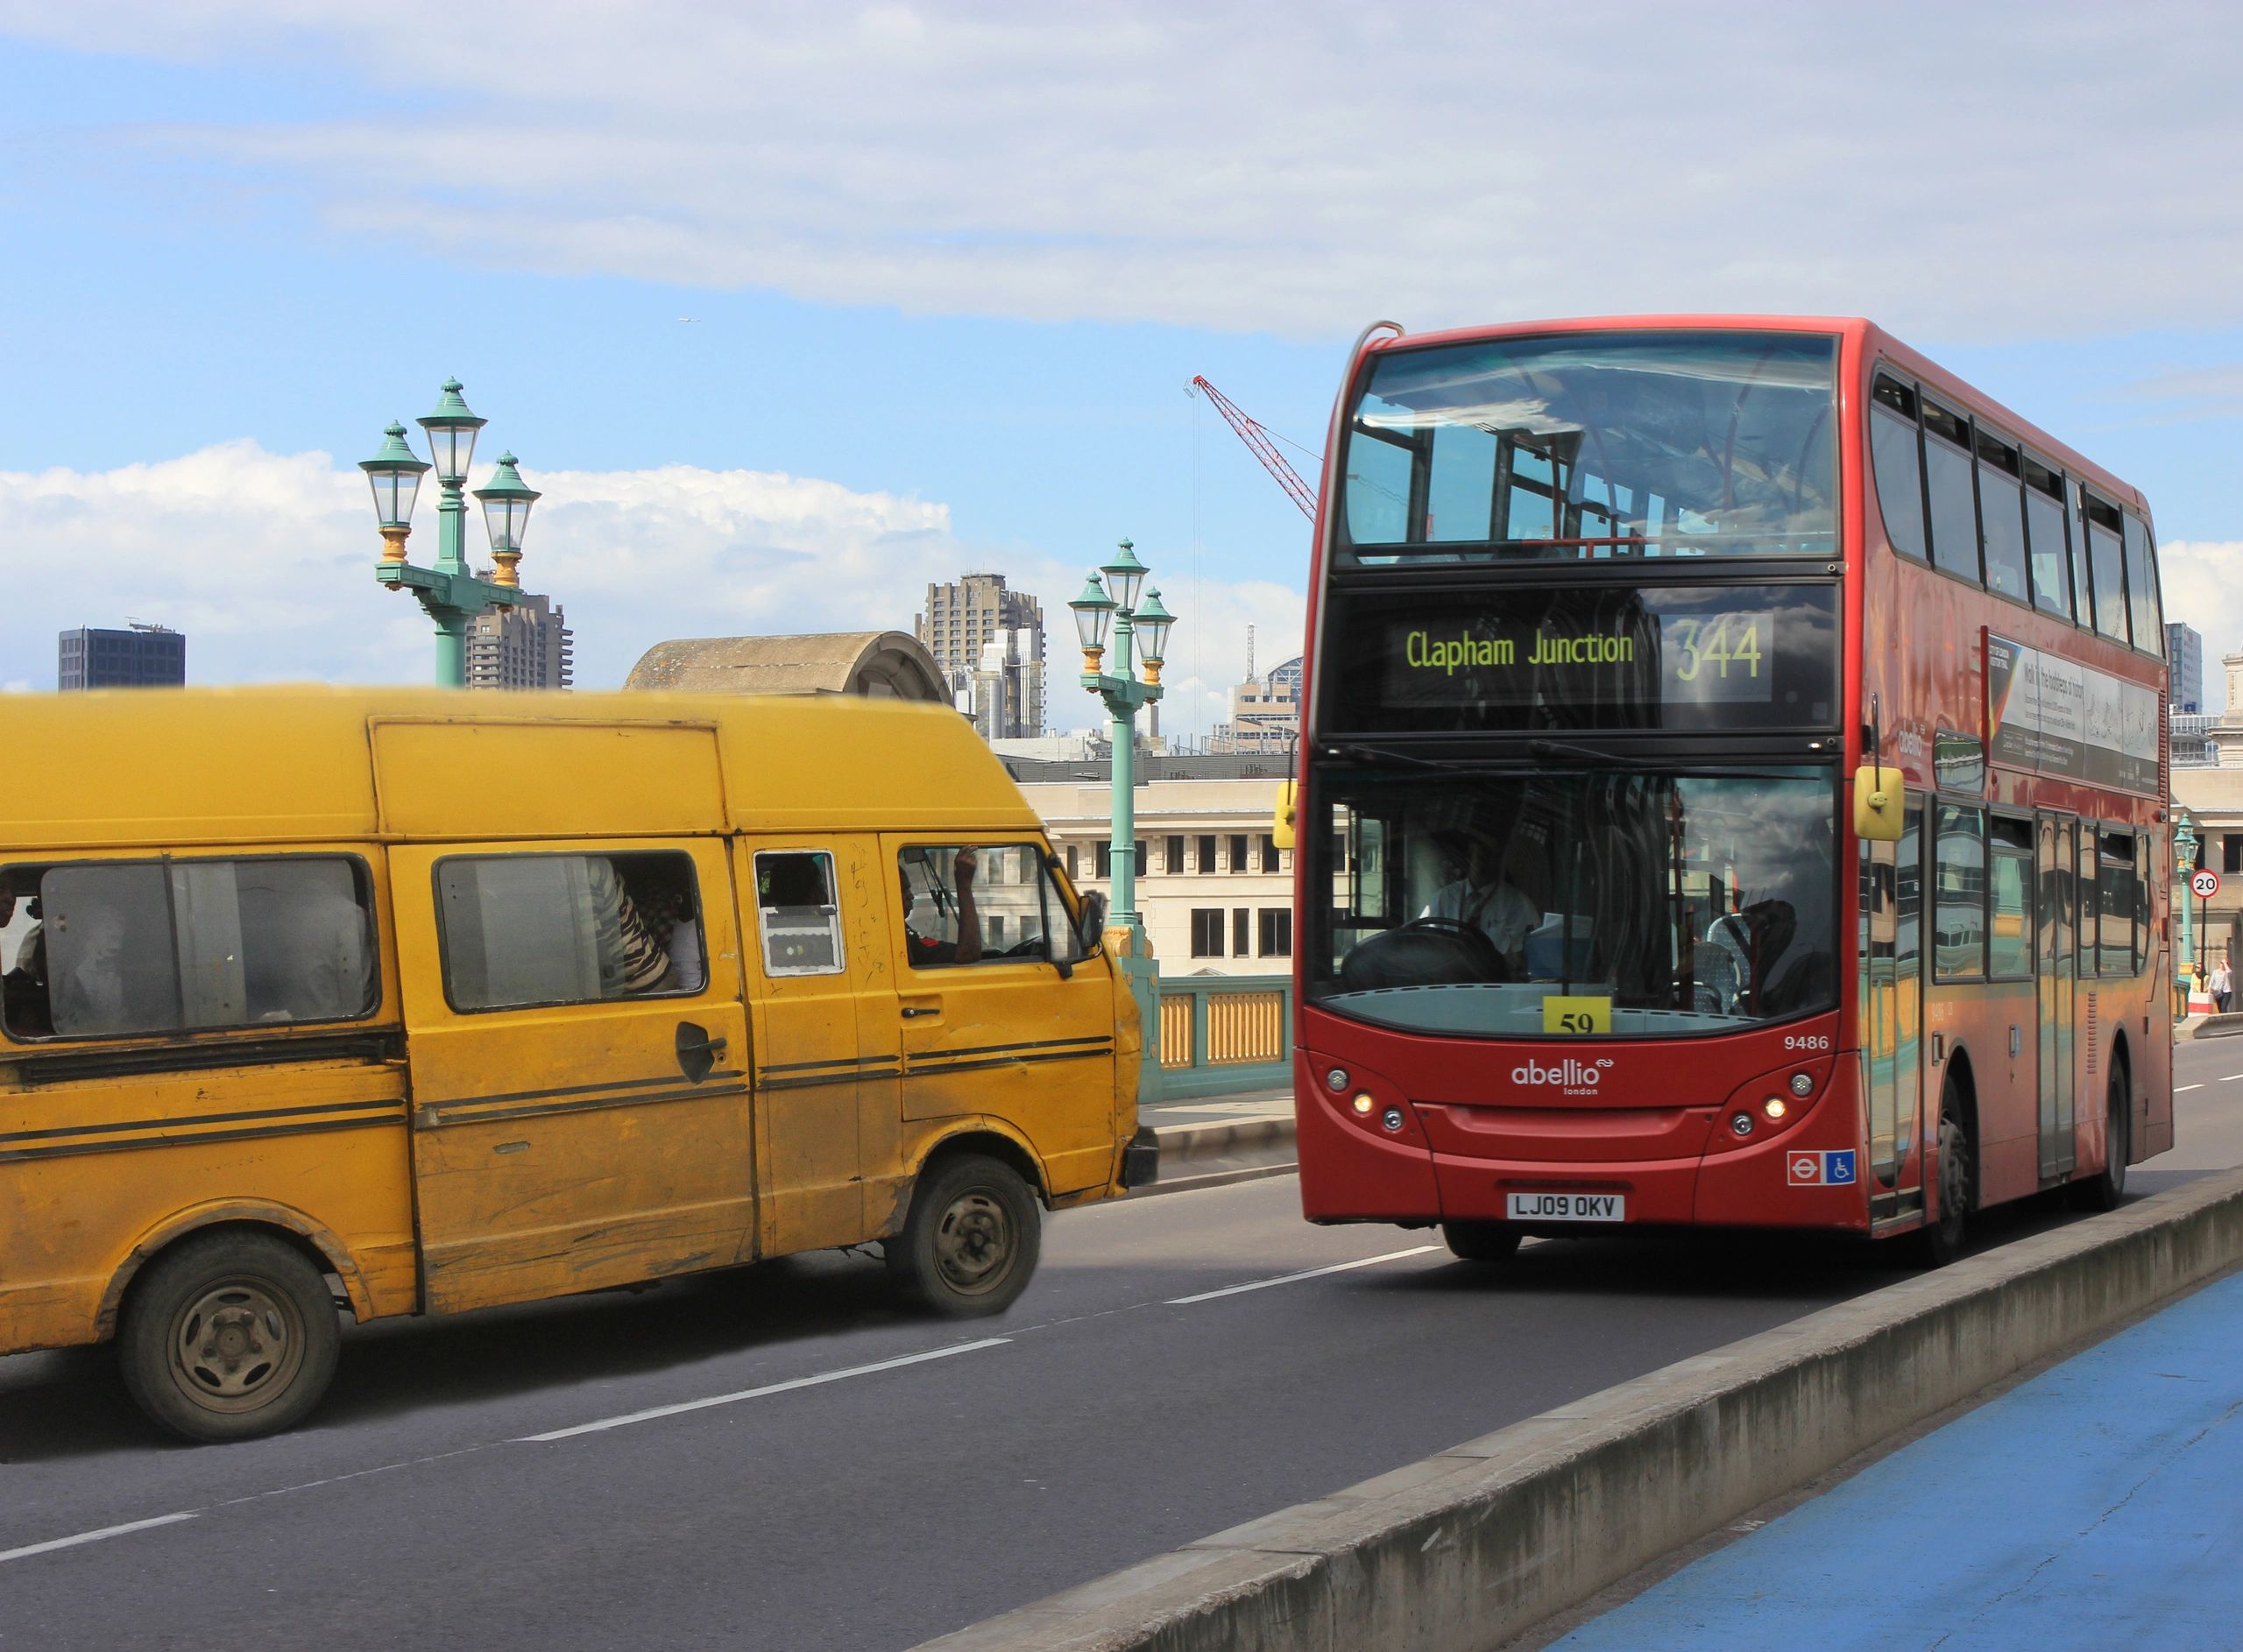 A yellow Danfo from Lagos finds itself crossing paths with a red London Bus on Tower Bridge.